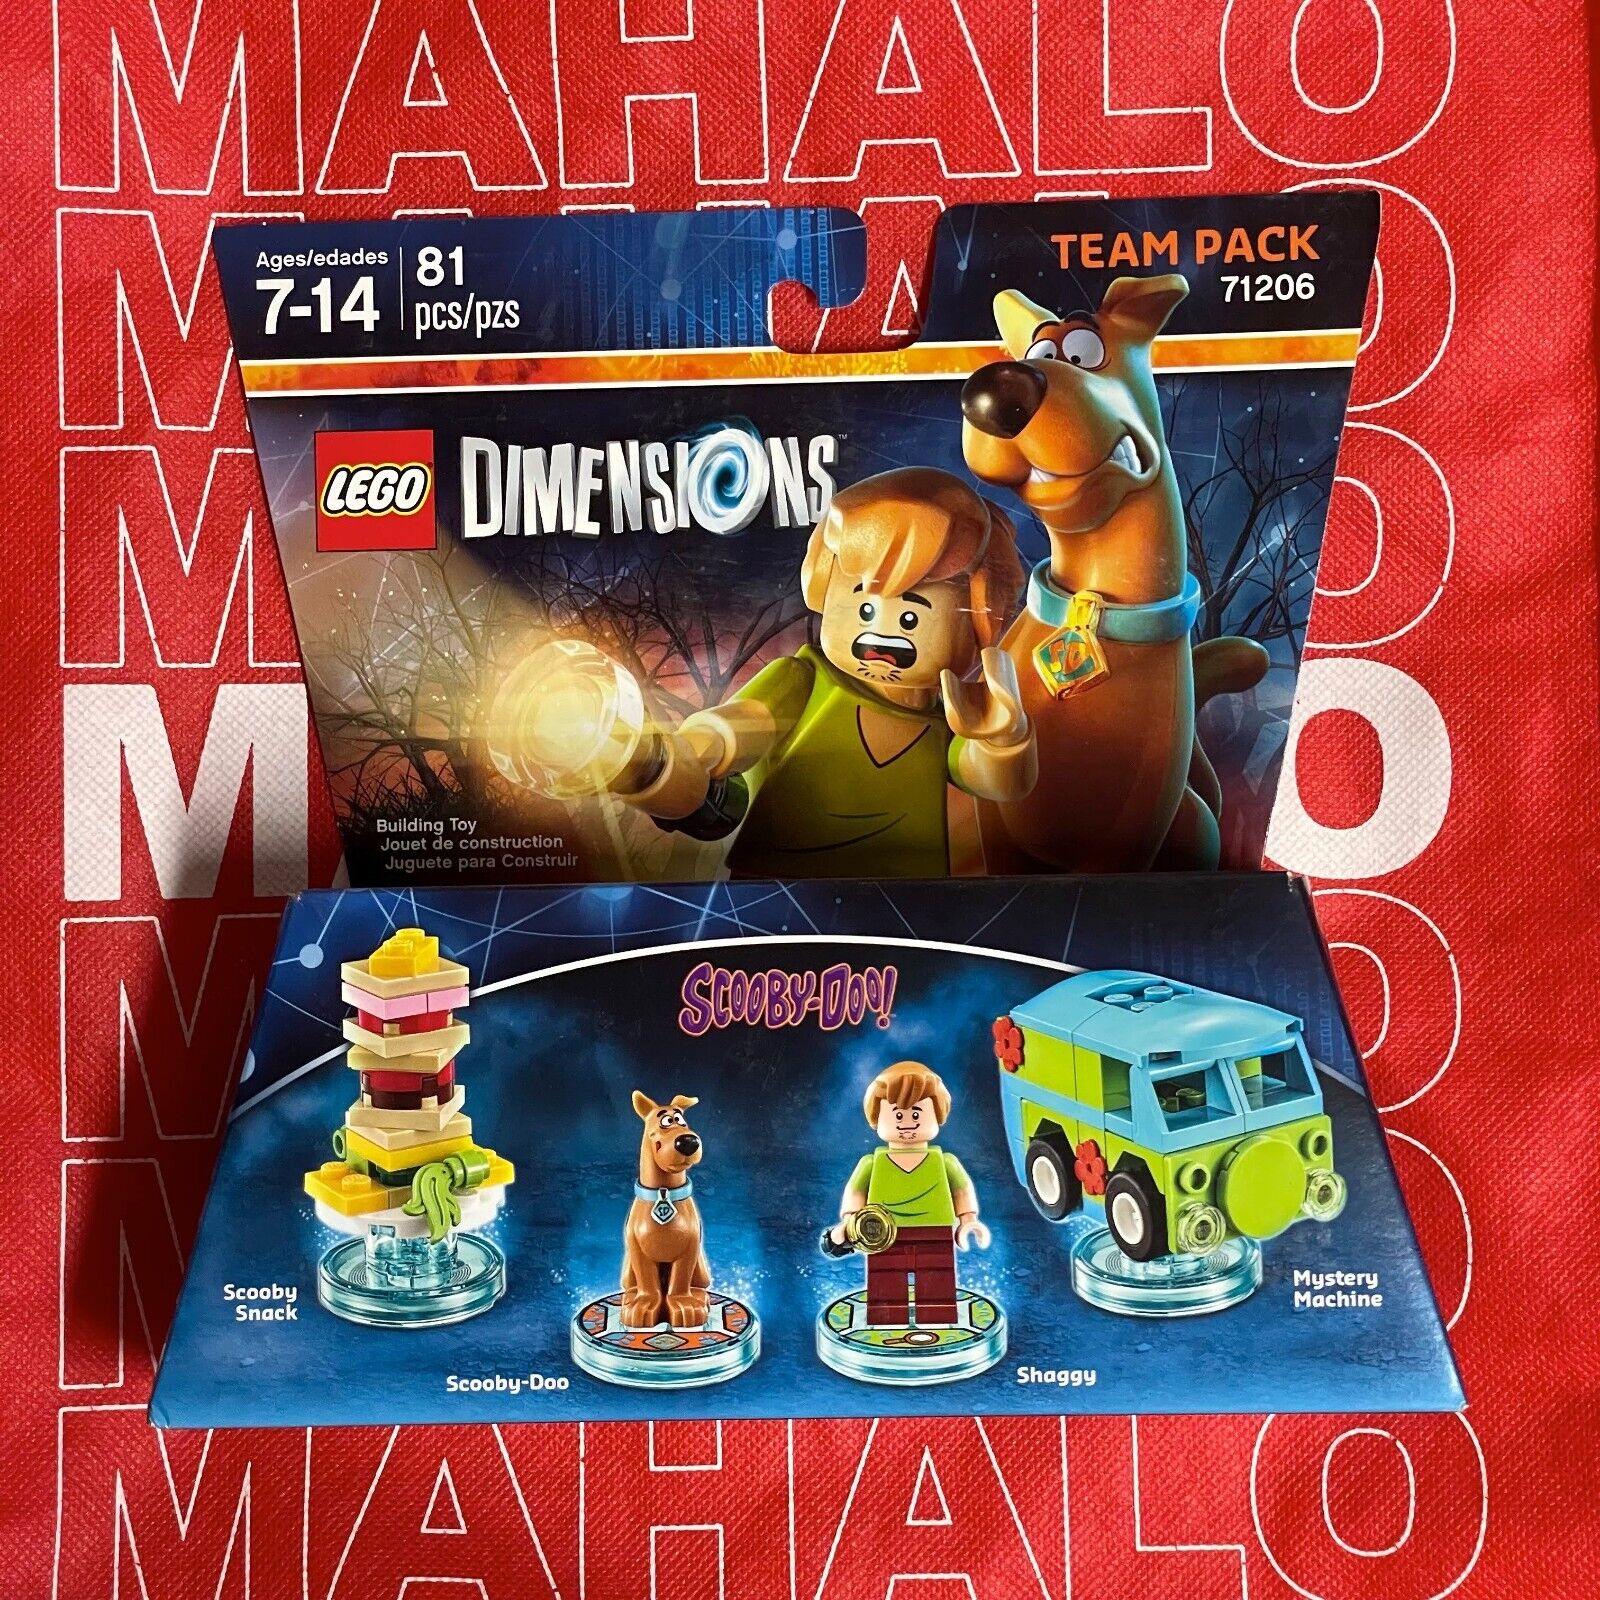 Tochi træ skelet Idol NEW Lego Dimensions Scooby-Doo Team Pack 71206 Sealed in box | eBay